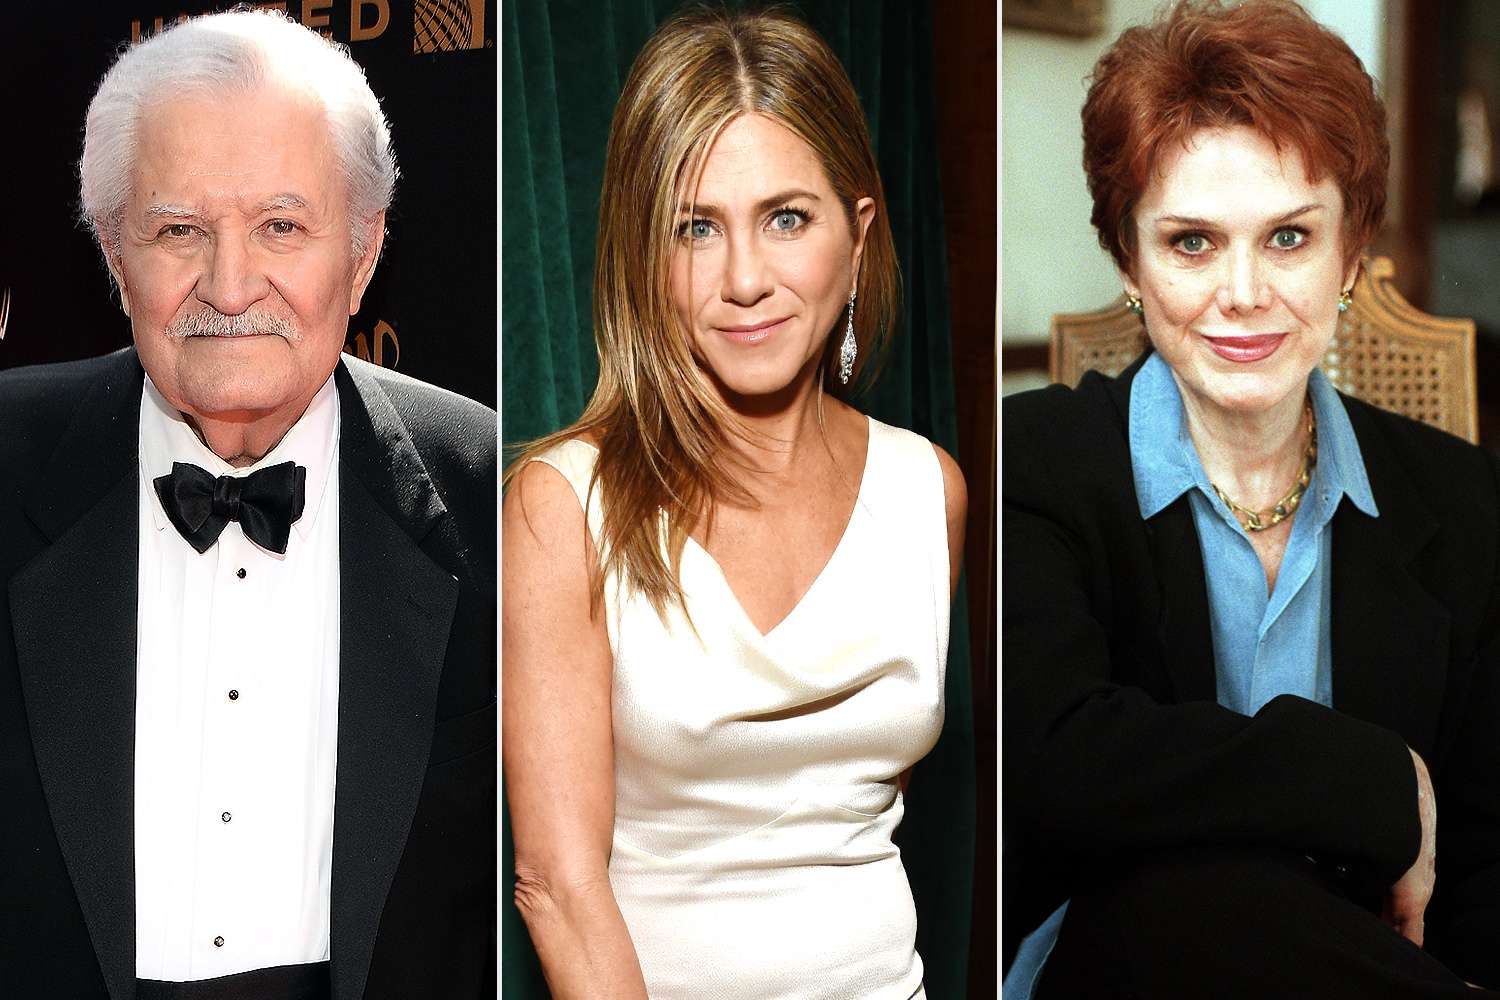 Who Are Jennifer Aniston's Parents? All About John Aniston and Nancy Dow